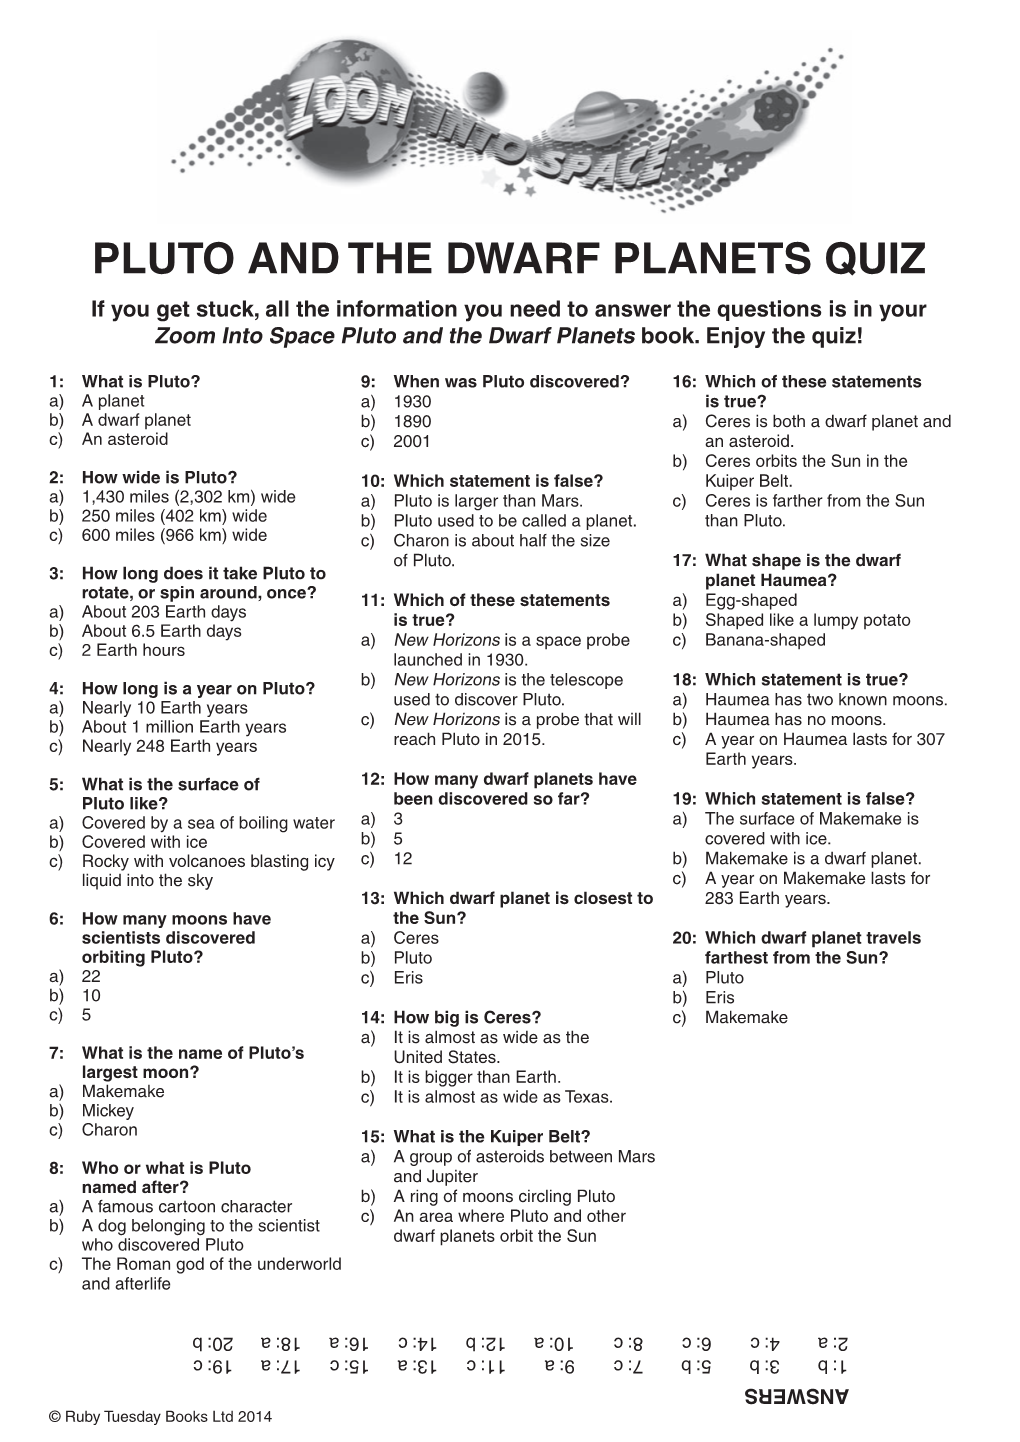 PLUTO and the DWARF PLANETS QUIZ If You Get Stuck, All the Information You Need to Answer the Questions Is in Your Zoom Into Space Pluto and the Dwarf Planets Book